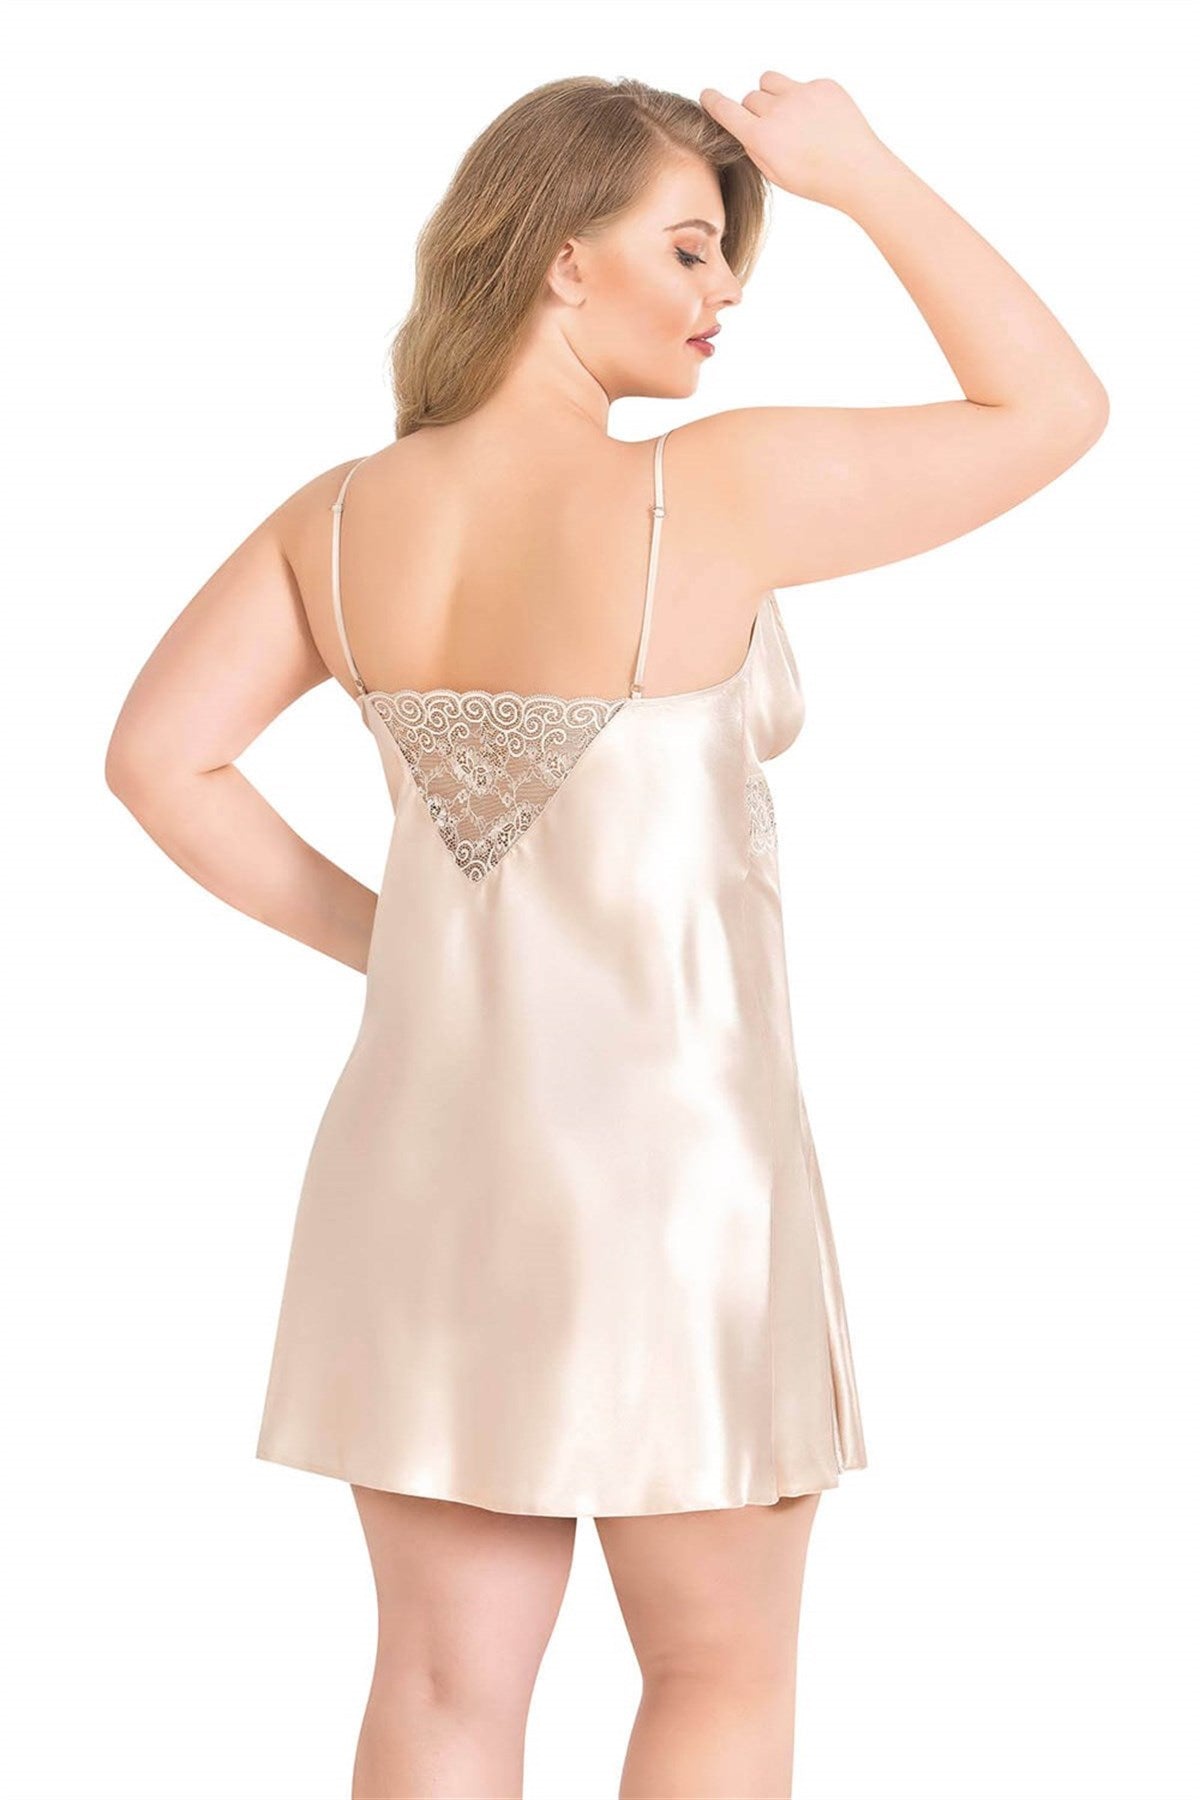 Plus Size Ivory Short Satin Nightgowns